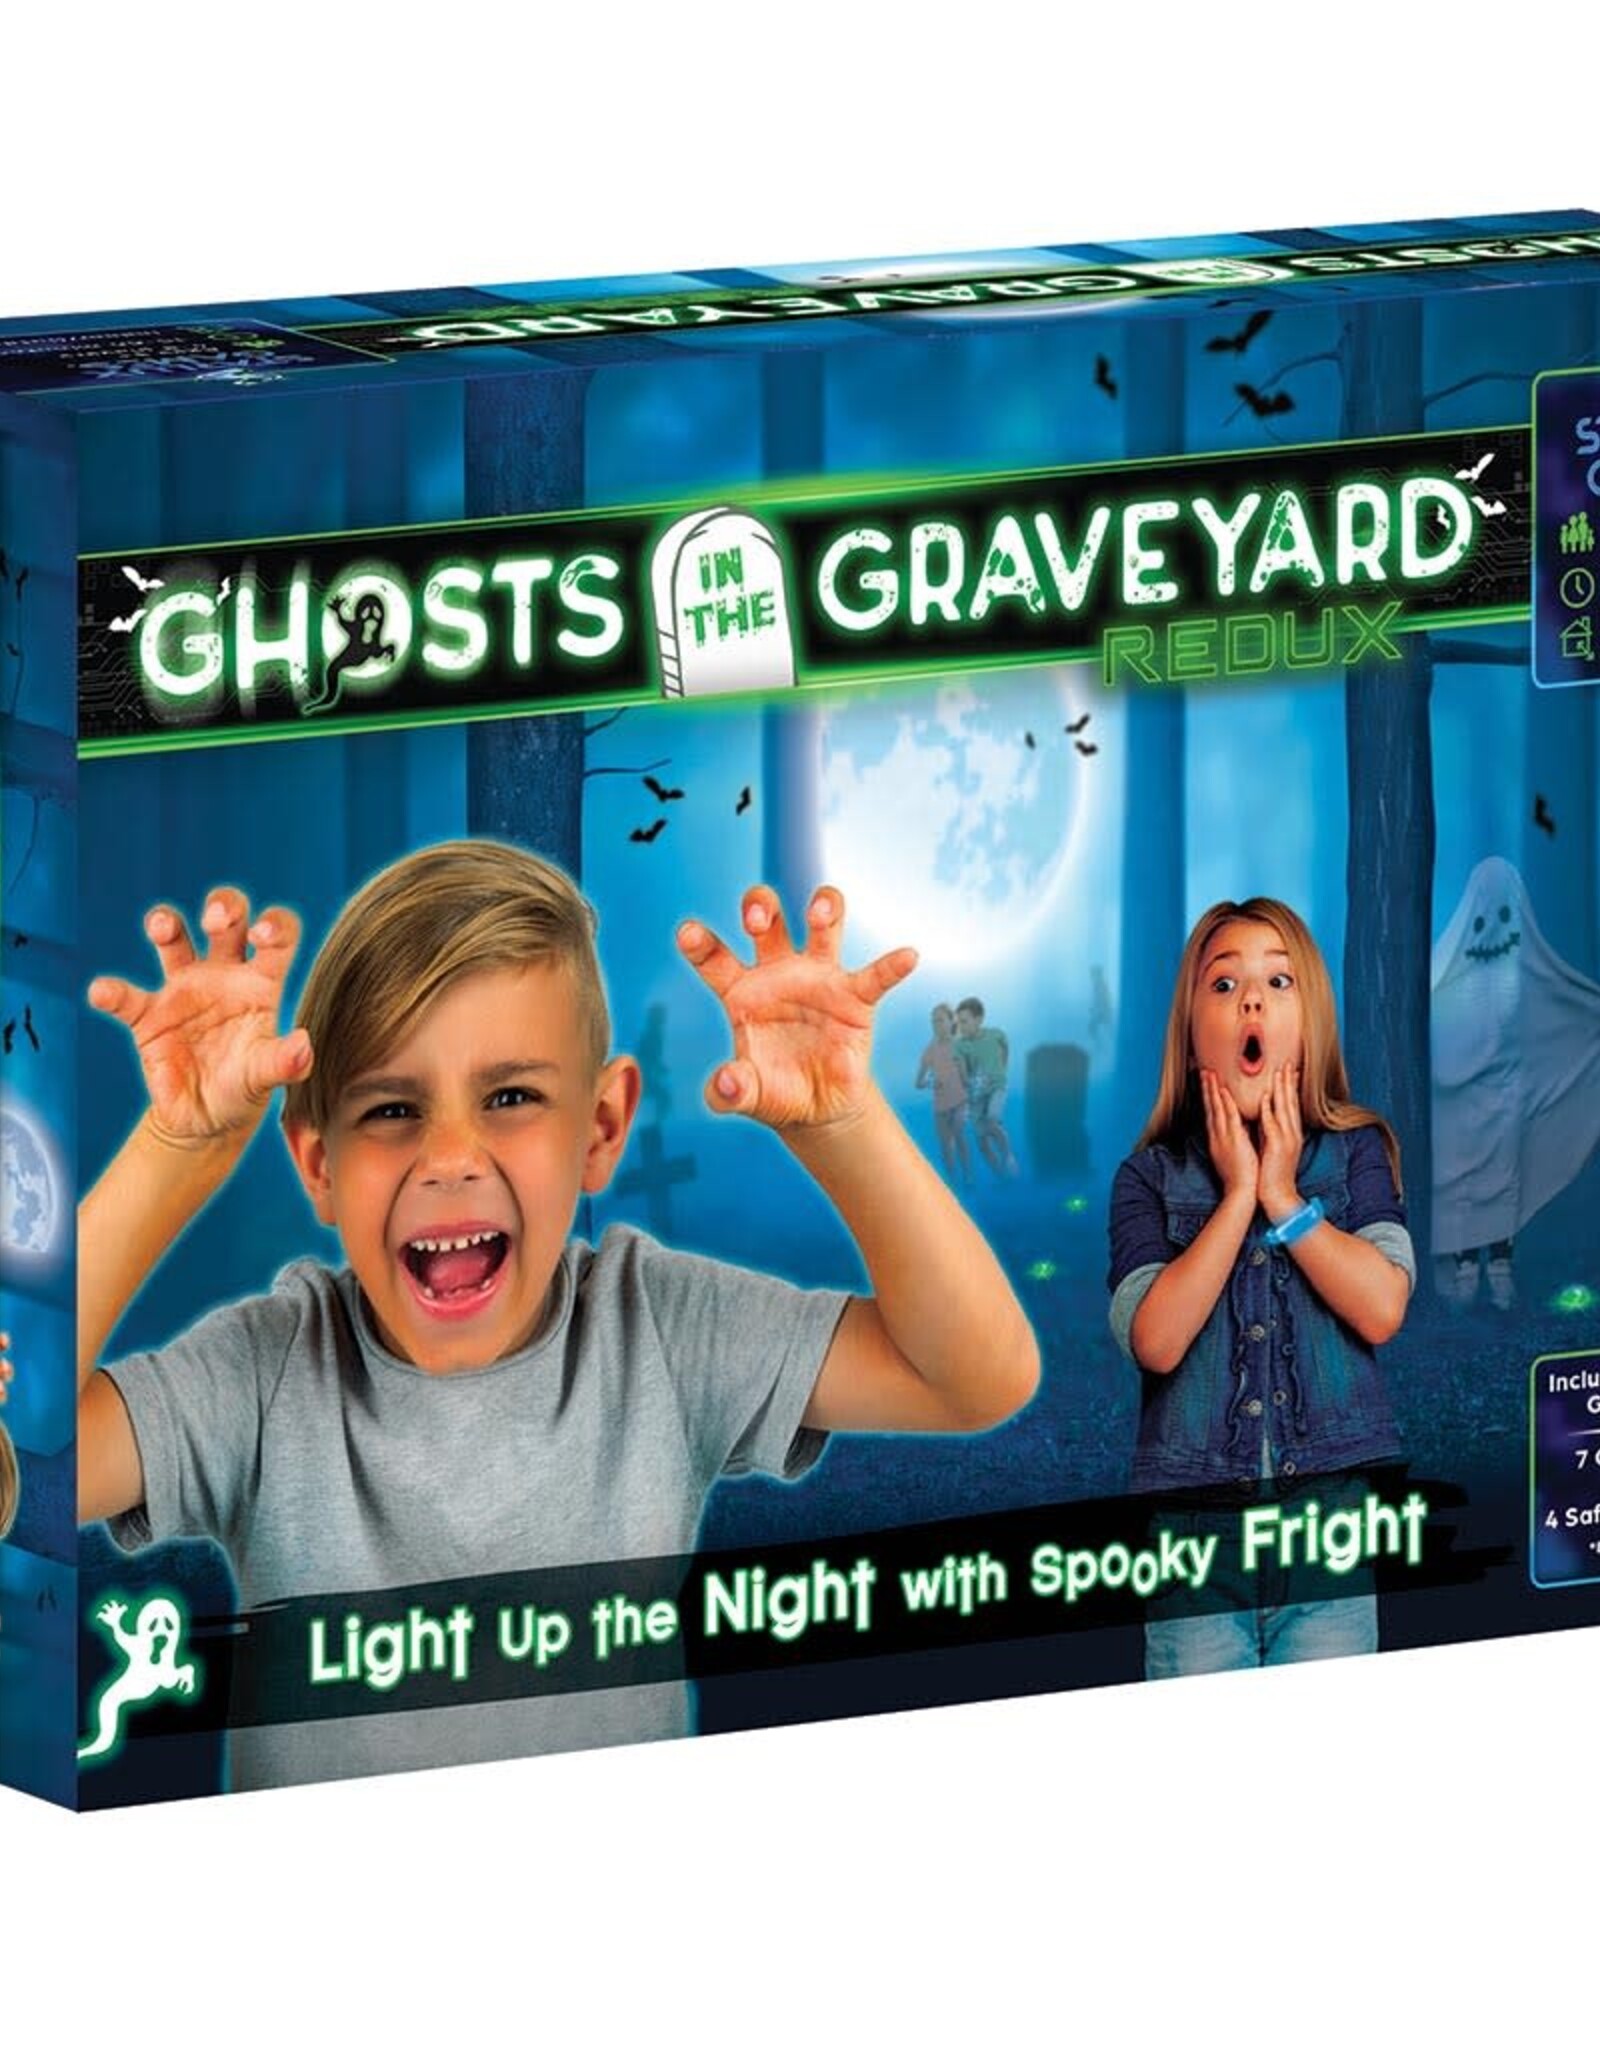 Starlux Games Ghosts in the Graveyard